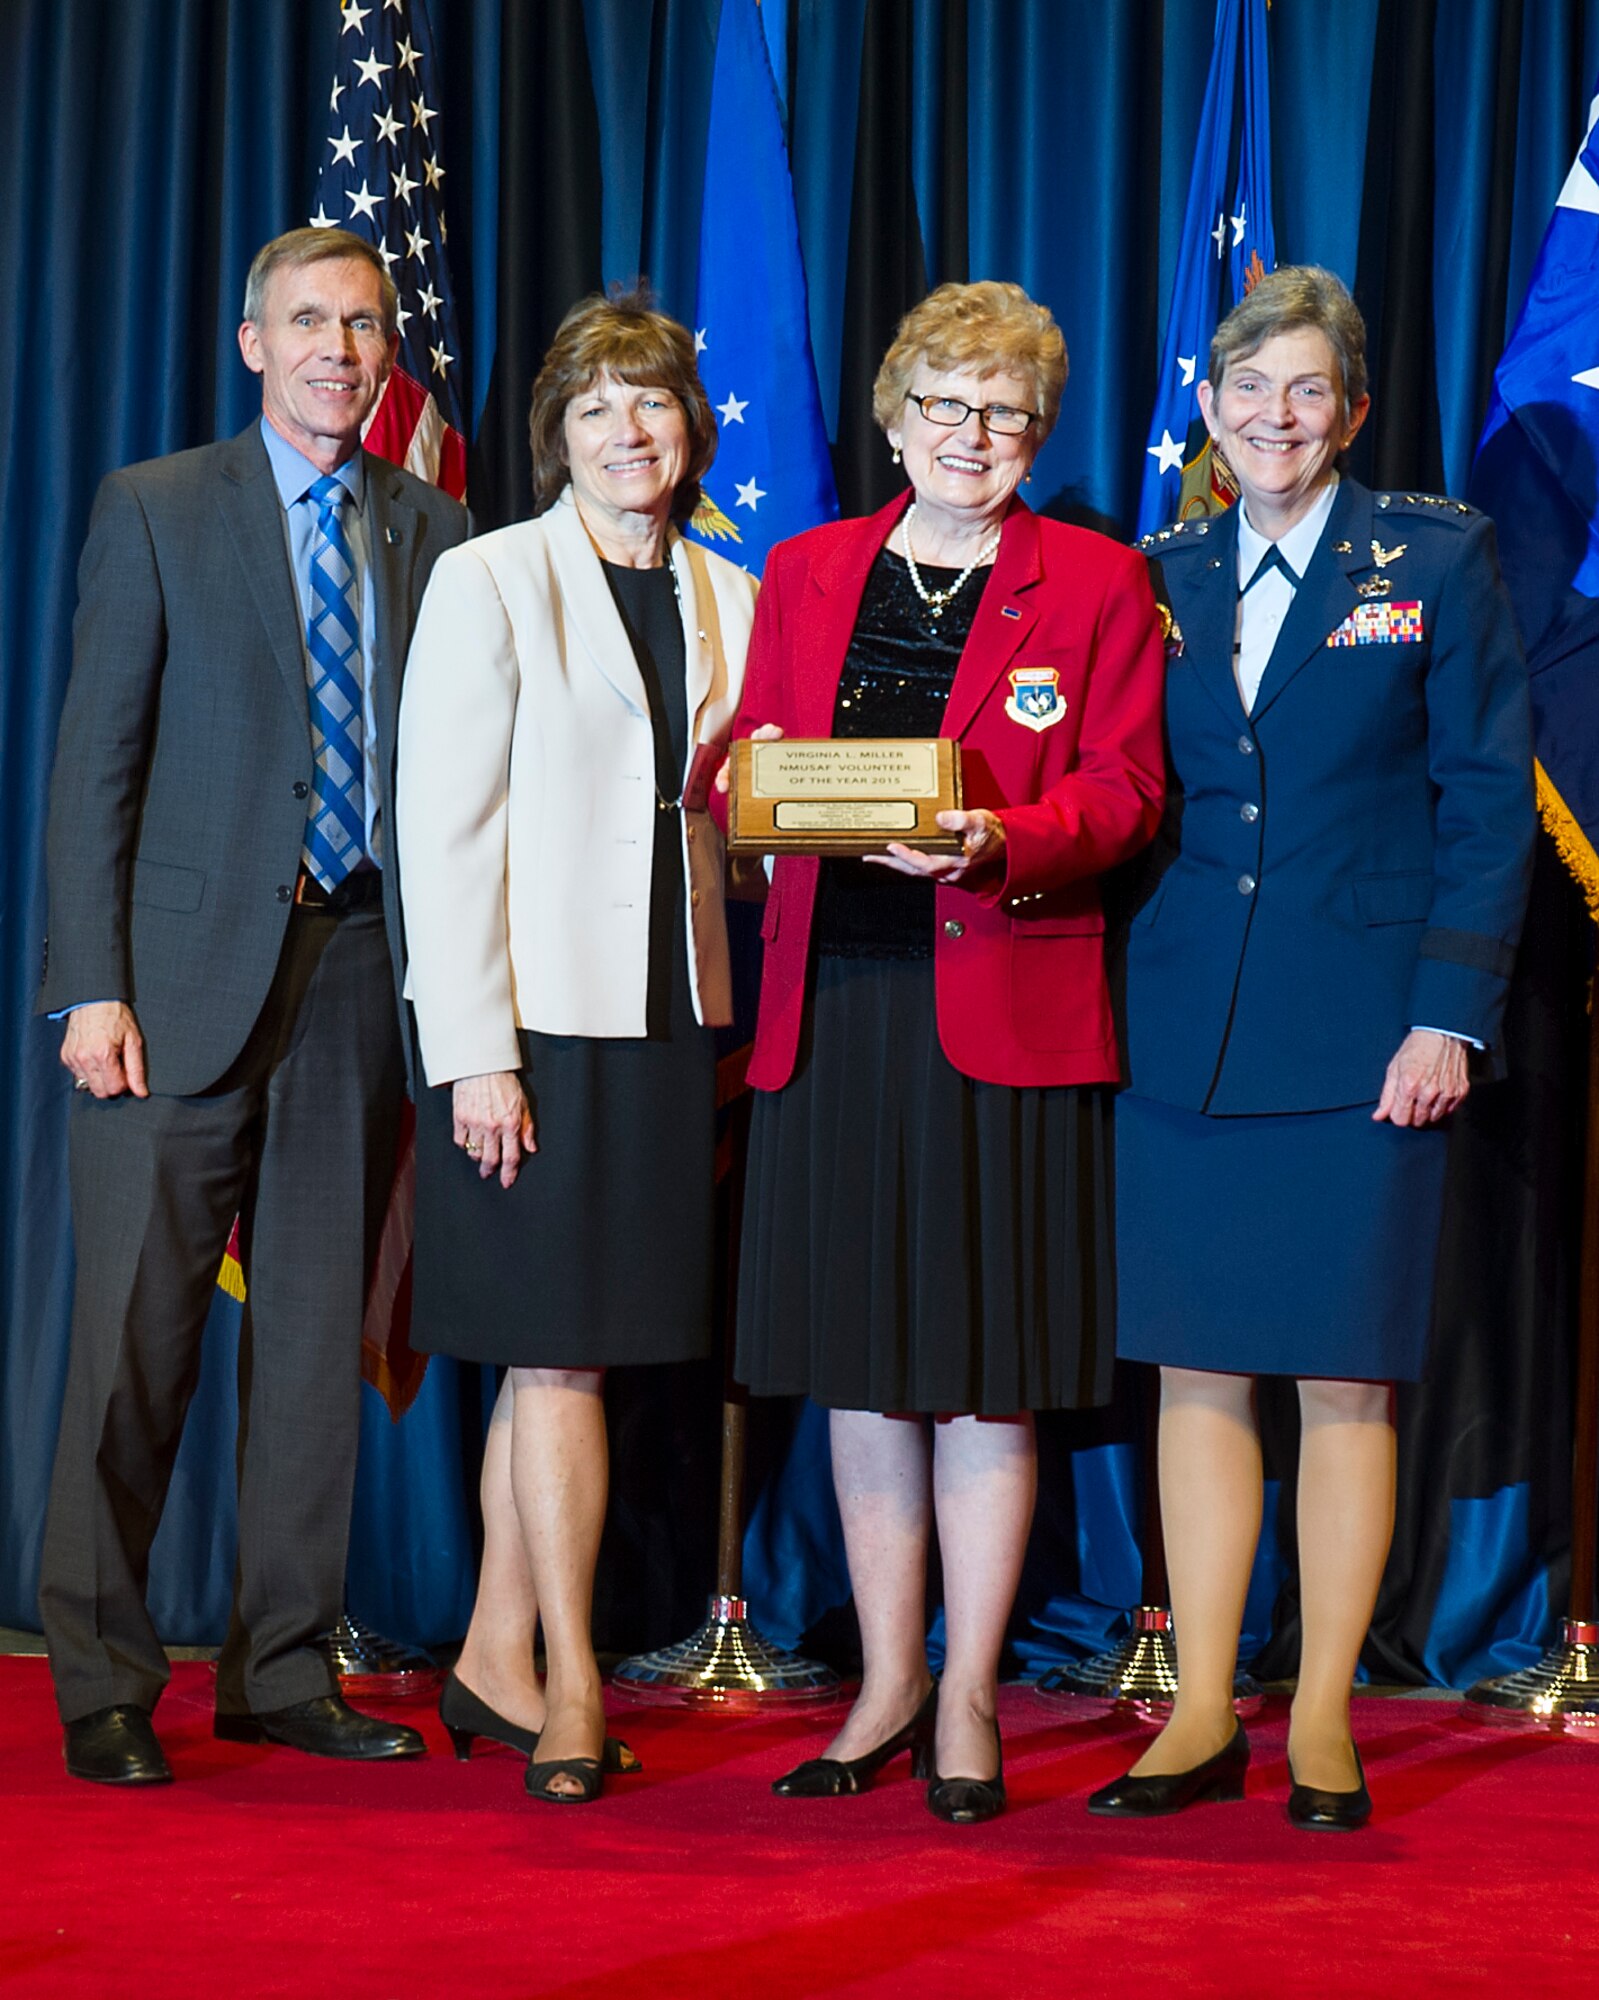 DAYTON, Ohio -- Virginia Miller (red jacket) received the 2015 Director’s Award for Volunteer of the Year for her dedication and excellence in serving the National Museum of the U.S. Air Force. (from left to right) Museum Director Lt. Gen. (Ret.) Jack Hudson, Air Force Museum Foundation Chairman Board of Managers Fran Duntz, Museum Volunteer Virginia Miller, and Commander of Air Force Materiel Command, Gen. Ellen M. Pawlikowski. (U.S. Air Force photo)  